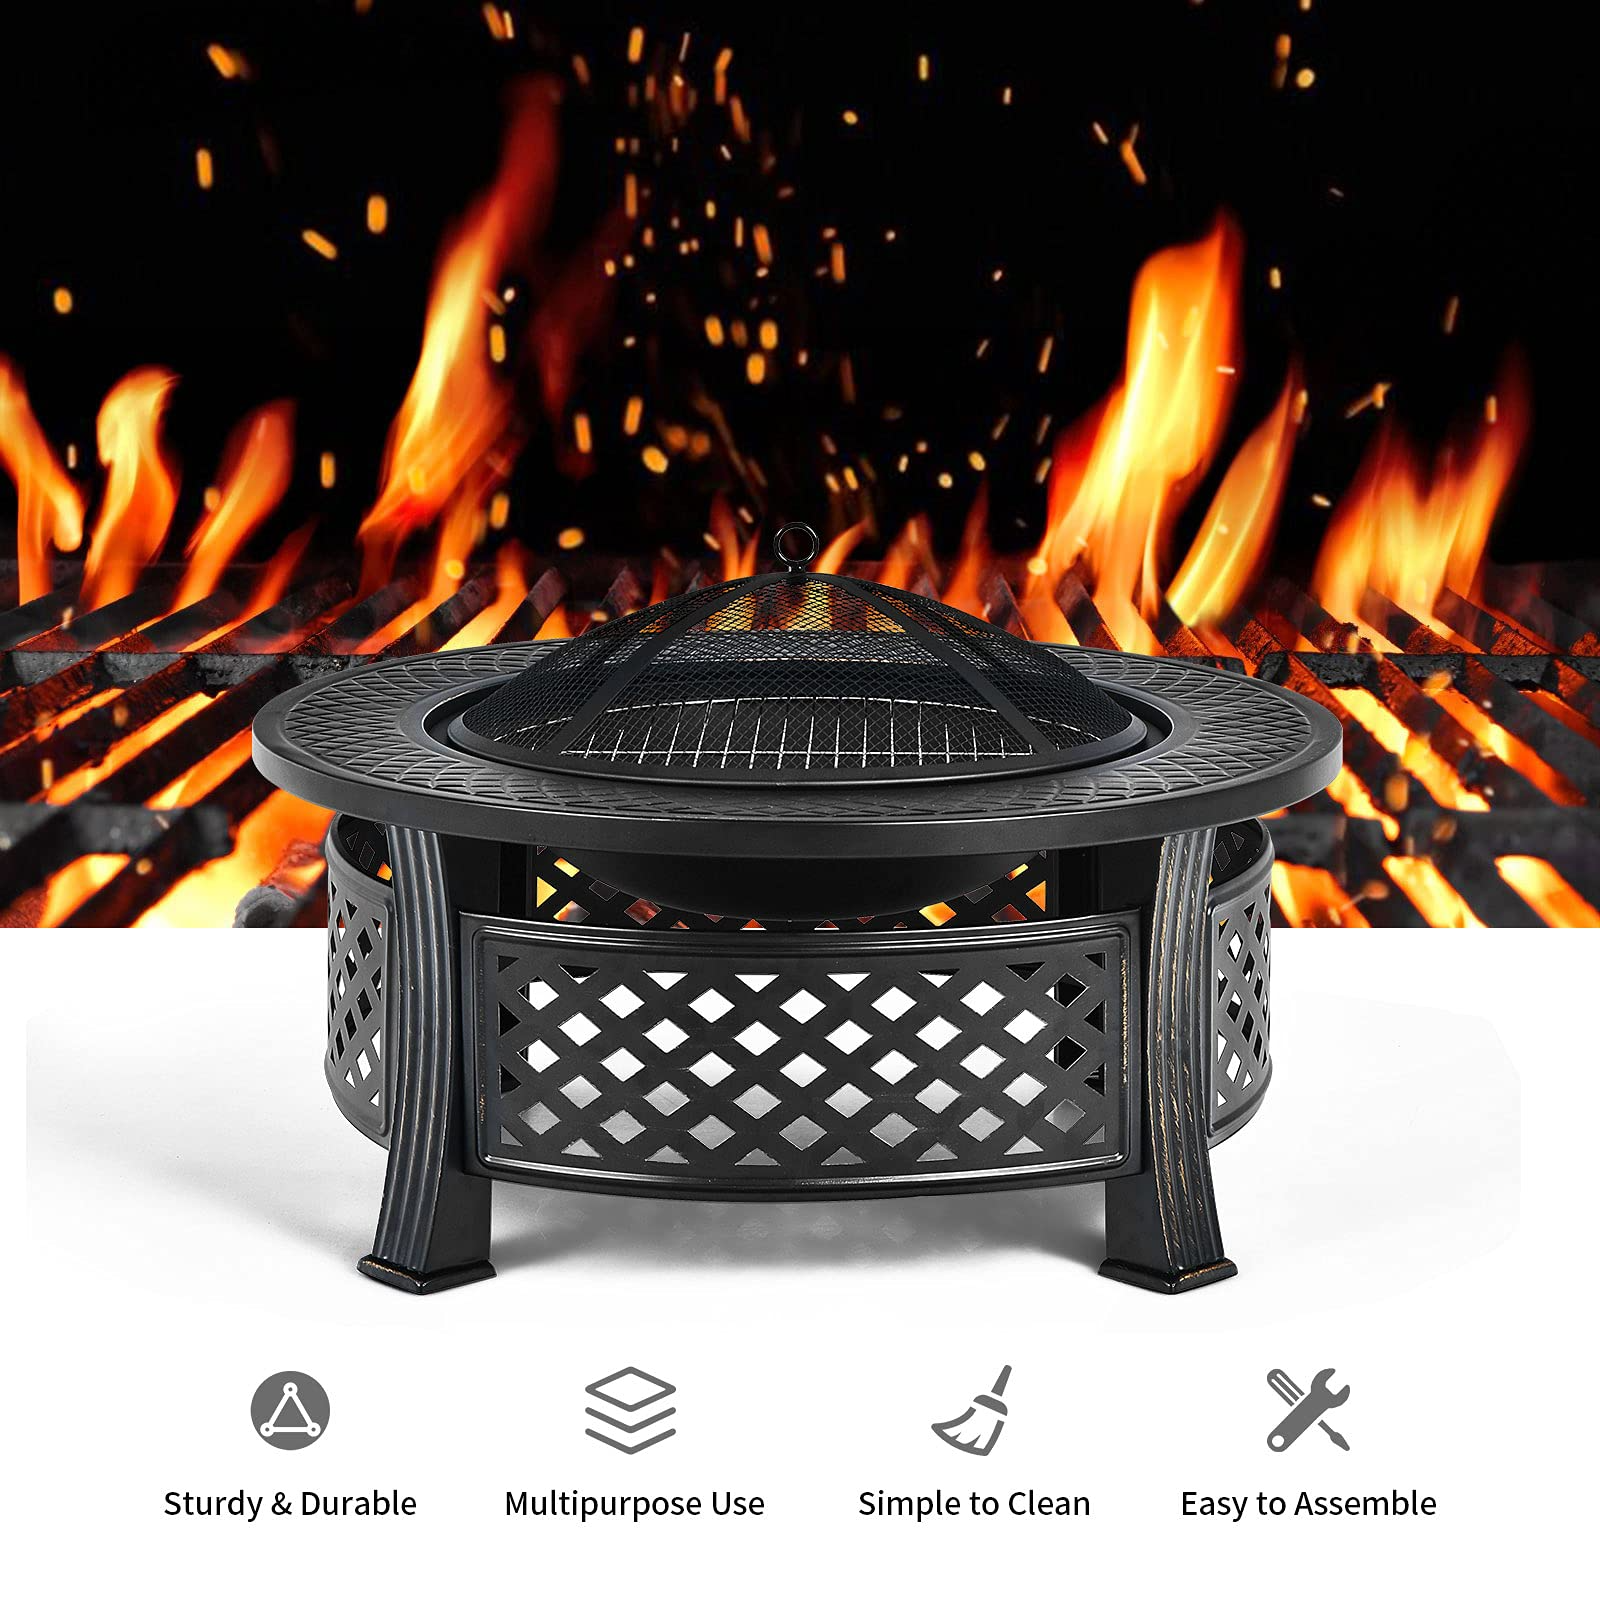 Giantex 32" Fire Pit, 3 in 1 Round Log Burner w/ High-Temp Resistance Finish